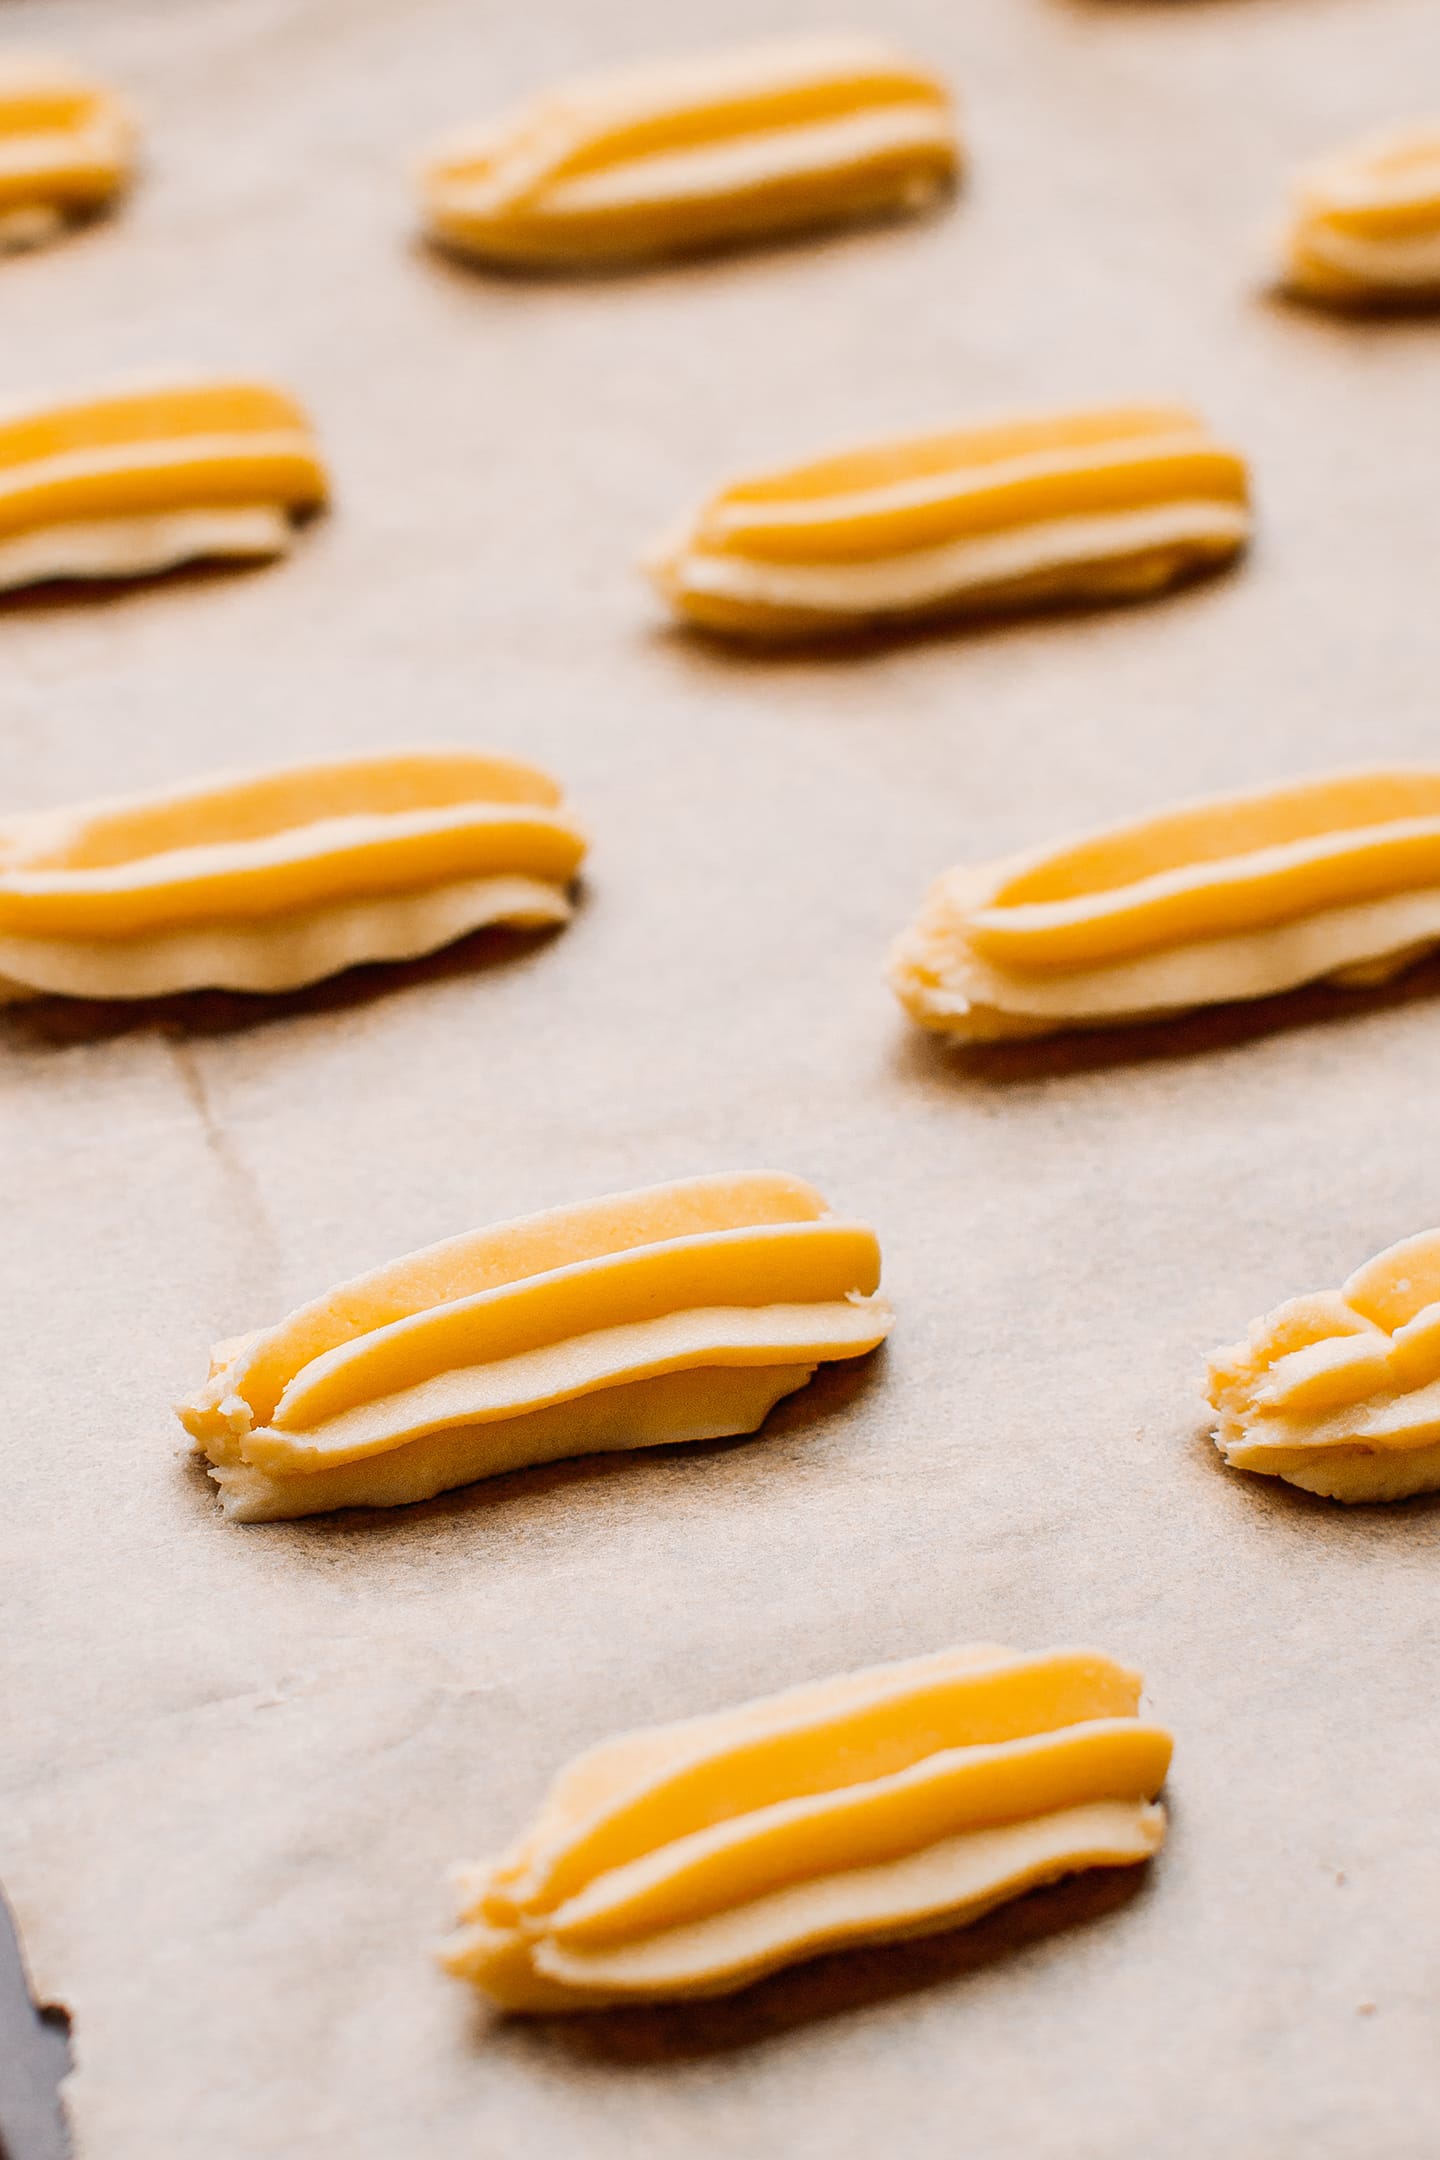 Unbaked spritz cookies on a baking sheet.